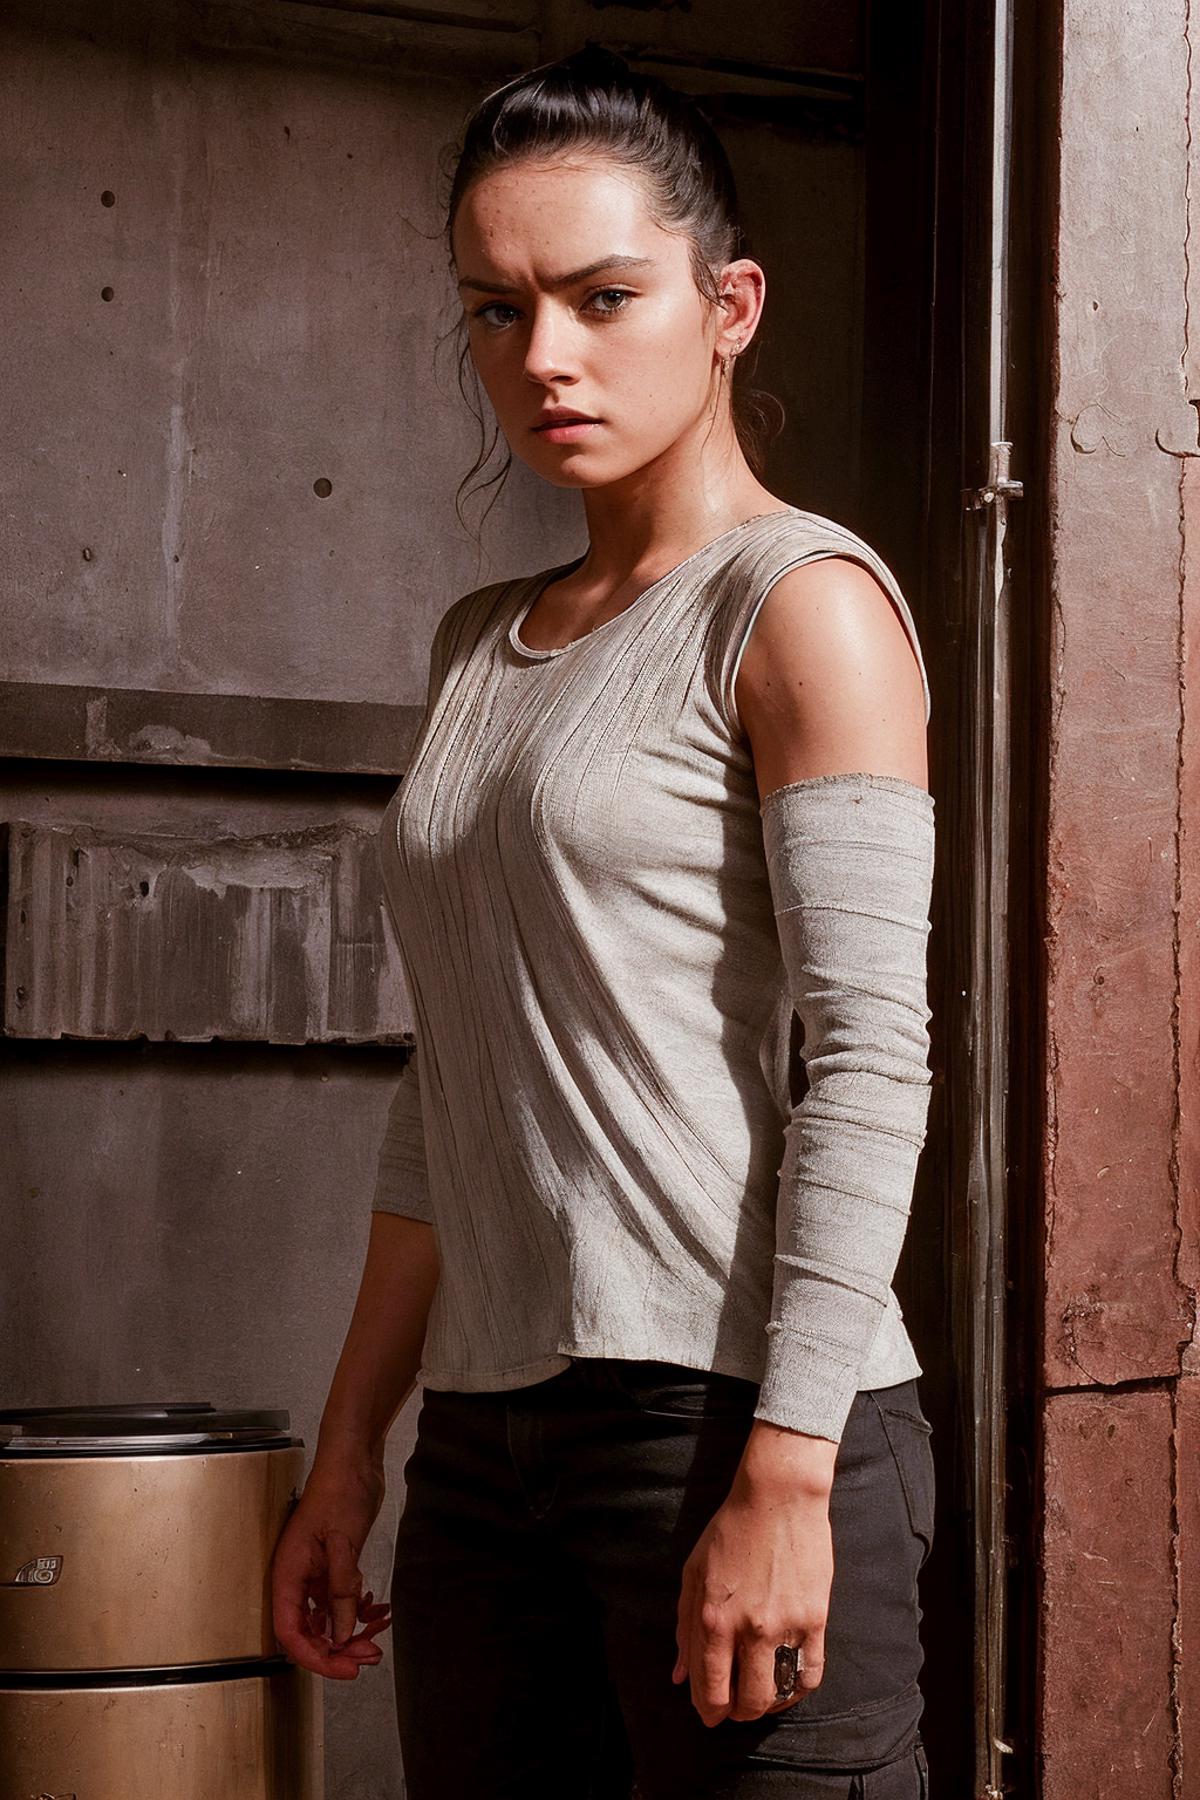 Rey from Star Wars (Daisy Ridley) image